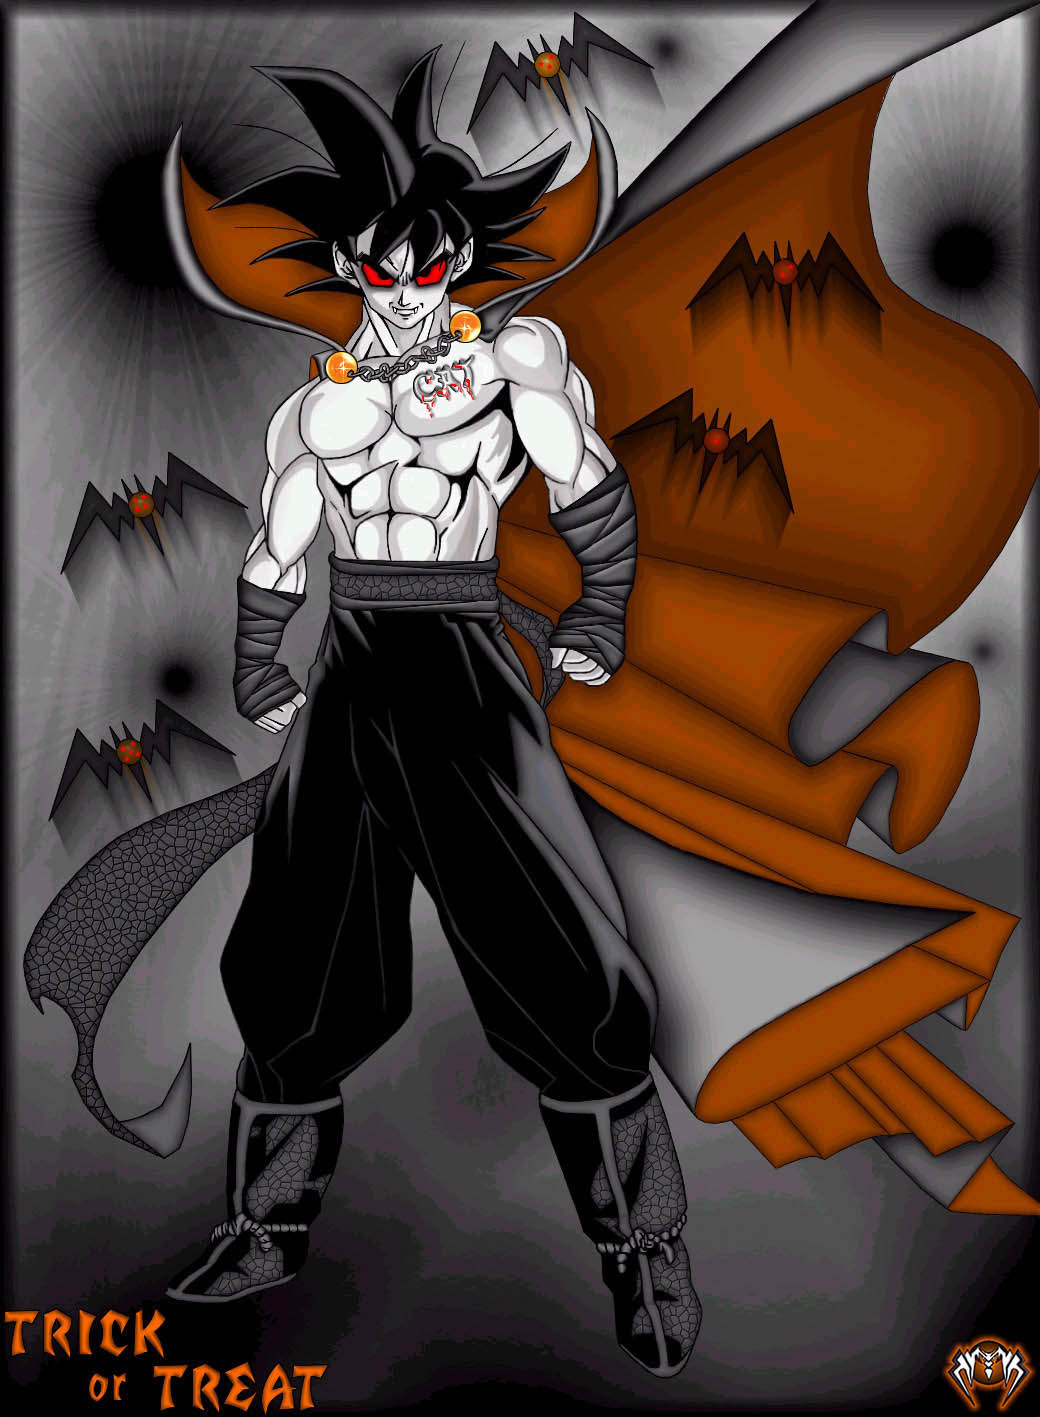 Halloween Goku
From my friend, WAR, wish I knew how he's doing (lost touch with him).
